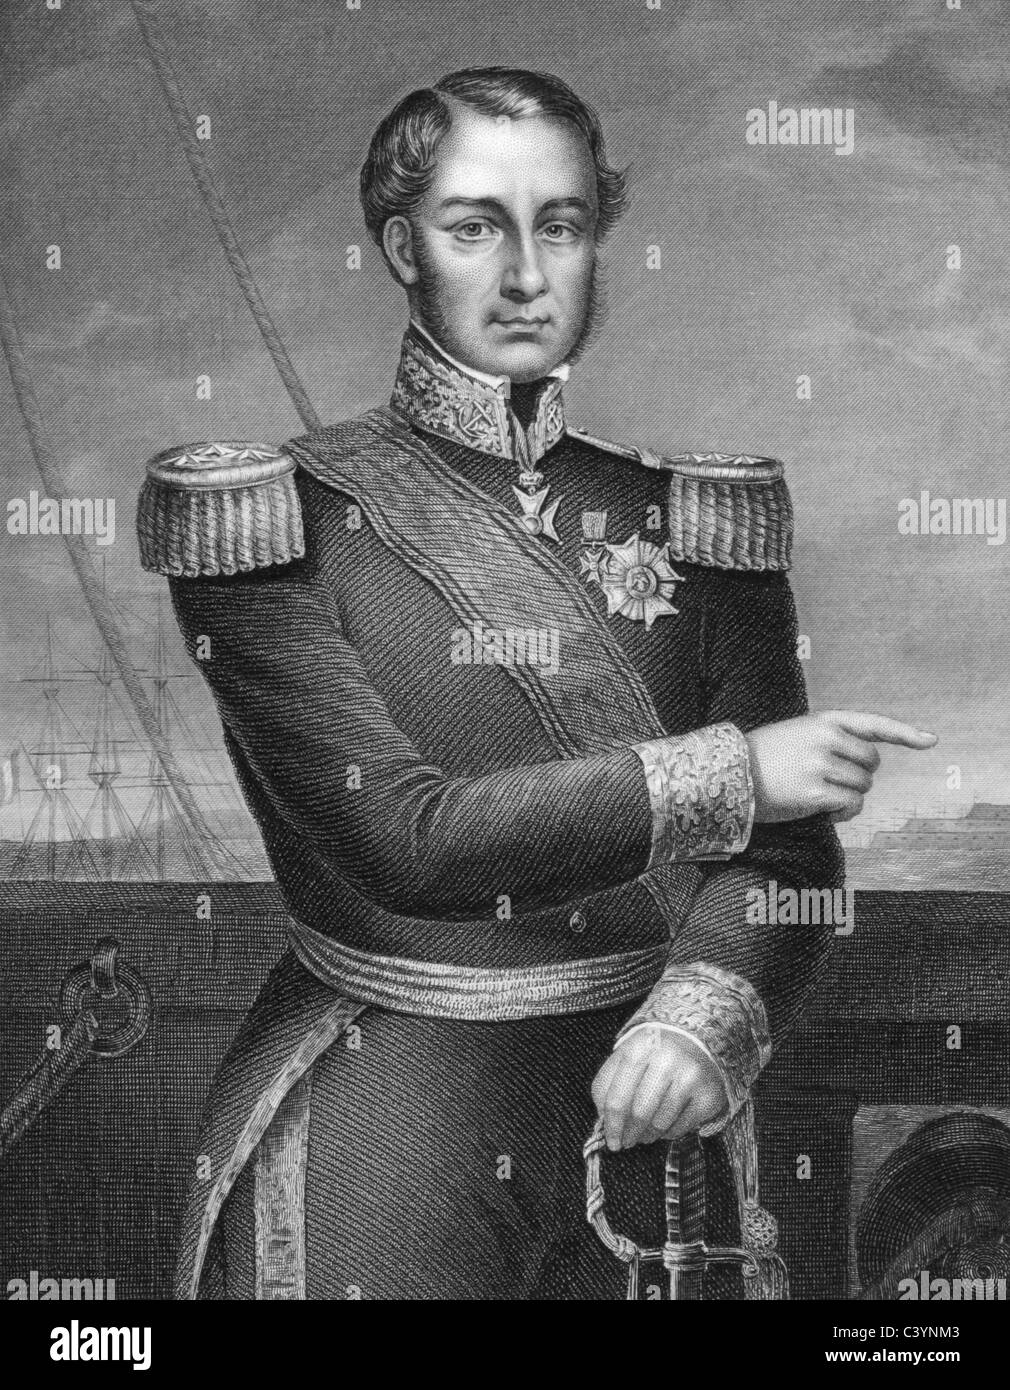 Ferdinand-Alphonse Hamelin (1796-1864) on engraving from 1800s. French admiral. Stock Photo